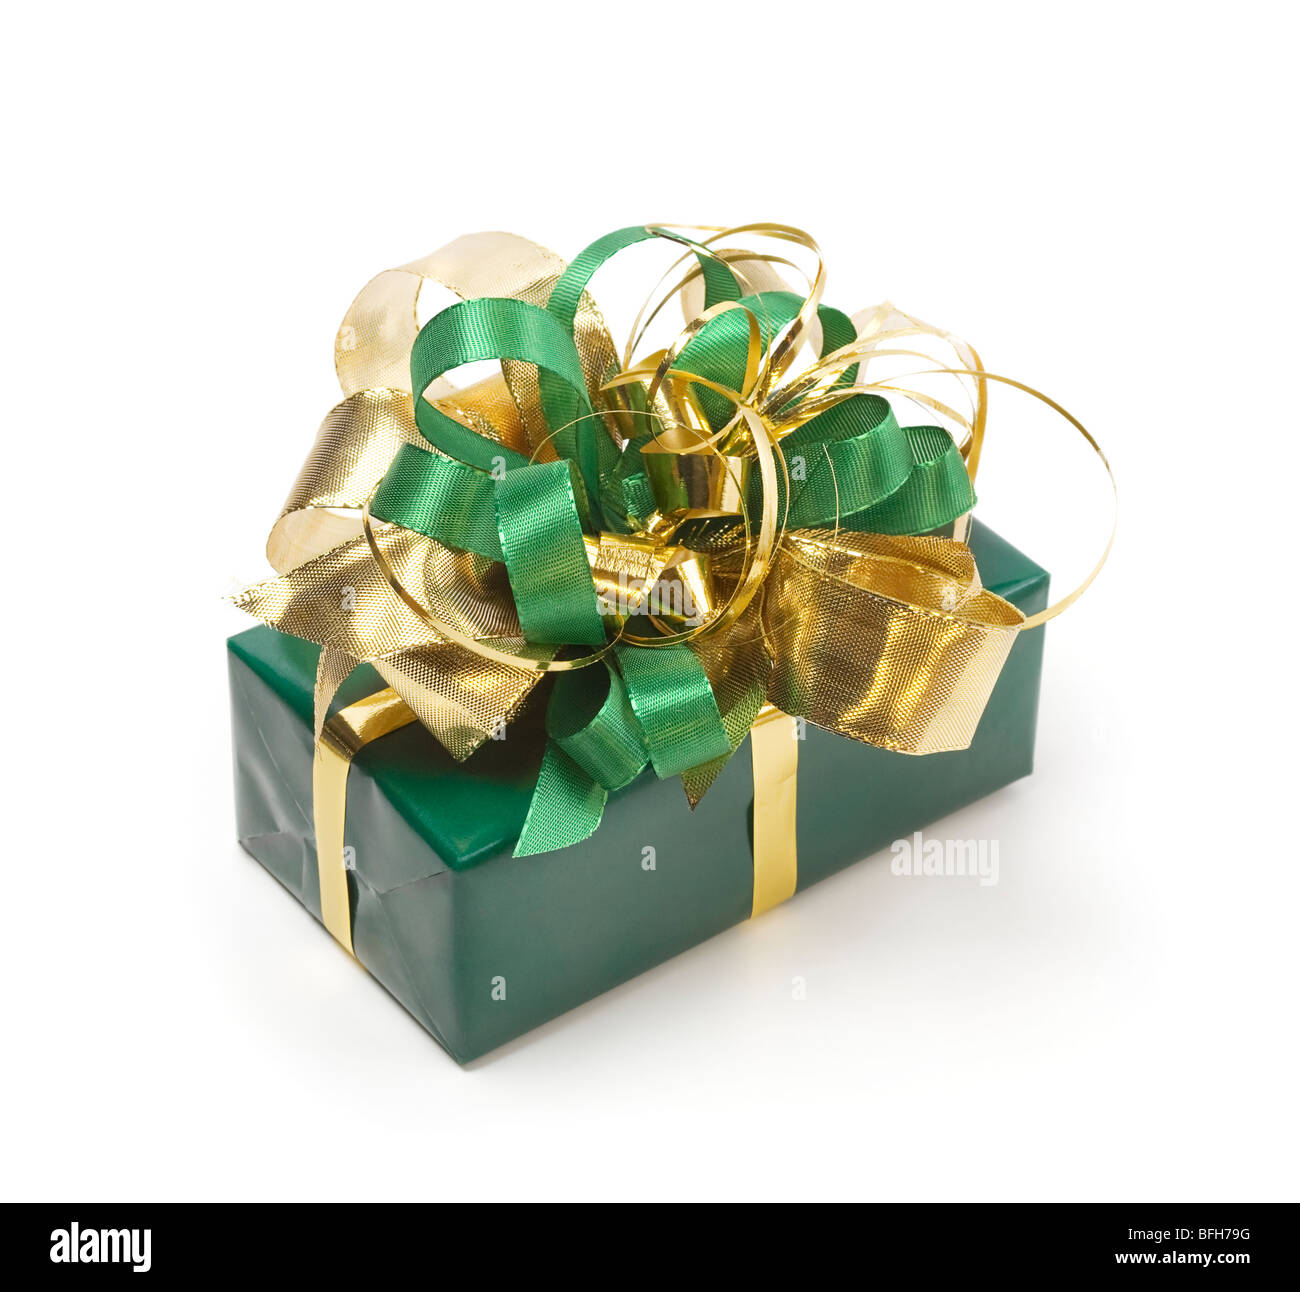 Green present with green and gold ribbons Stock Photo